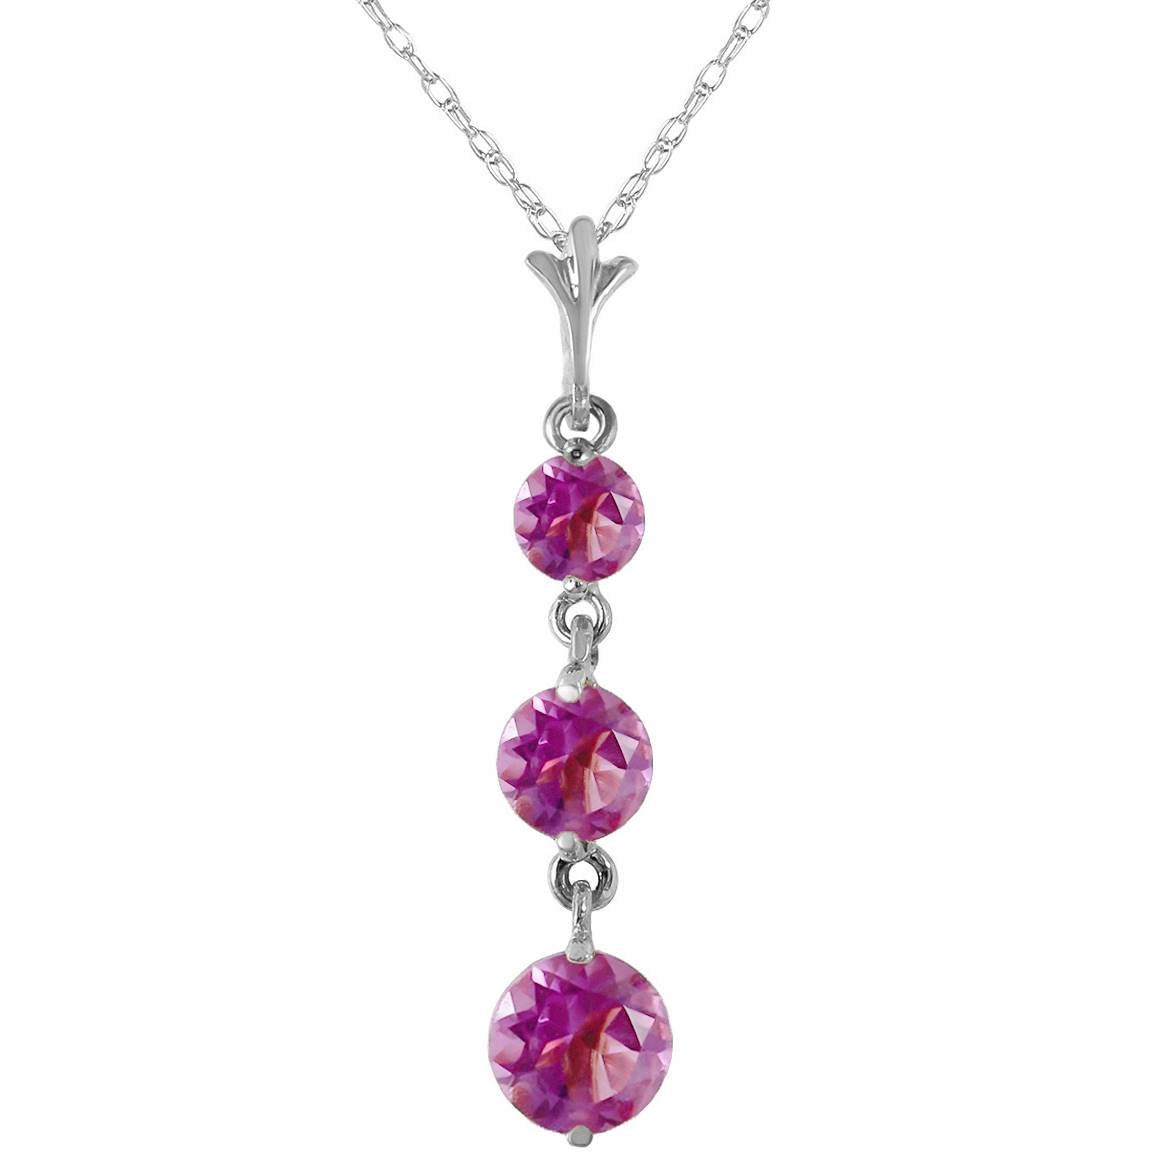 3.6 Carat 14K Solid White Gold Soaring High Amethyst Necklace